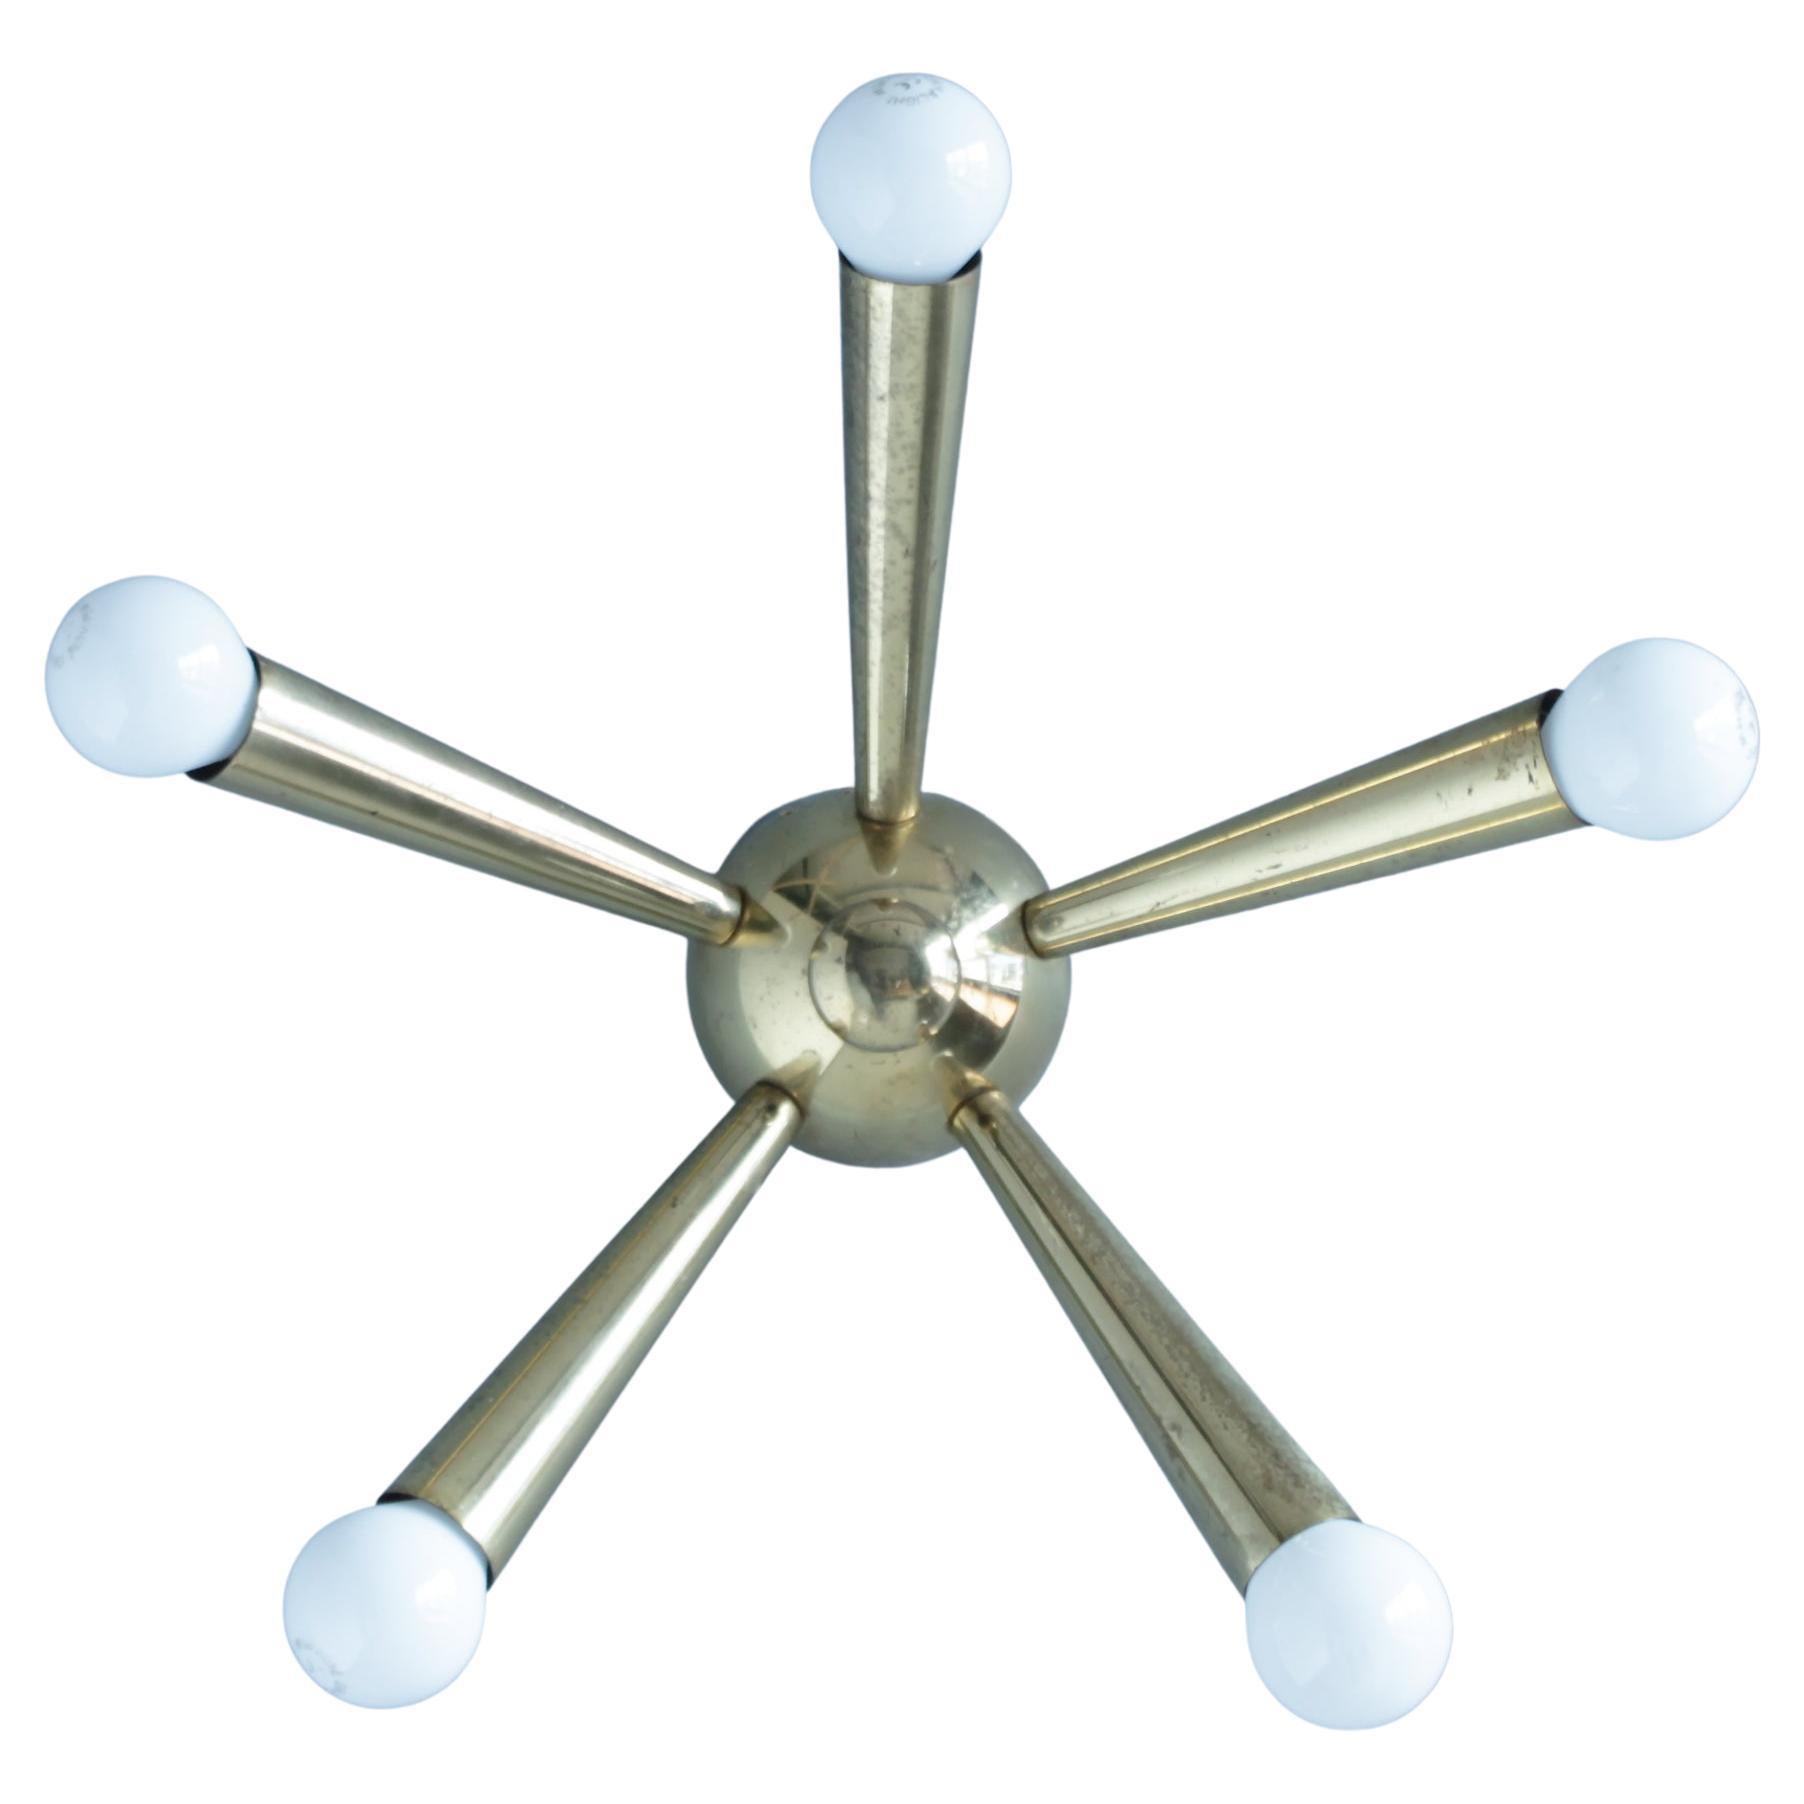 A highly decorative 5 arm sunburst, Sputnik or spider Italian ceiling lamp in the style of Arredoluce and Stilnovo. 
Dimensions: height 4.7 in. (12 cm), diameter 12.8 in. (32,5 cm), length single arm 5.7 in. (14,5 cm).

Consistent with age and